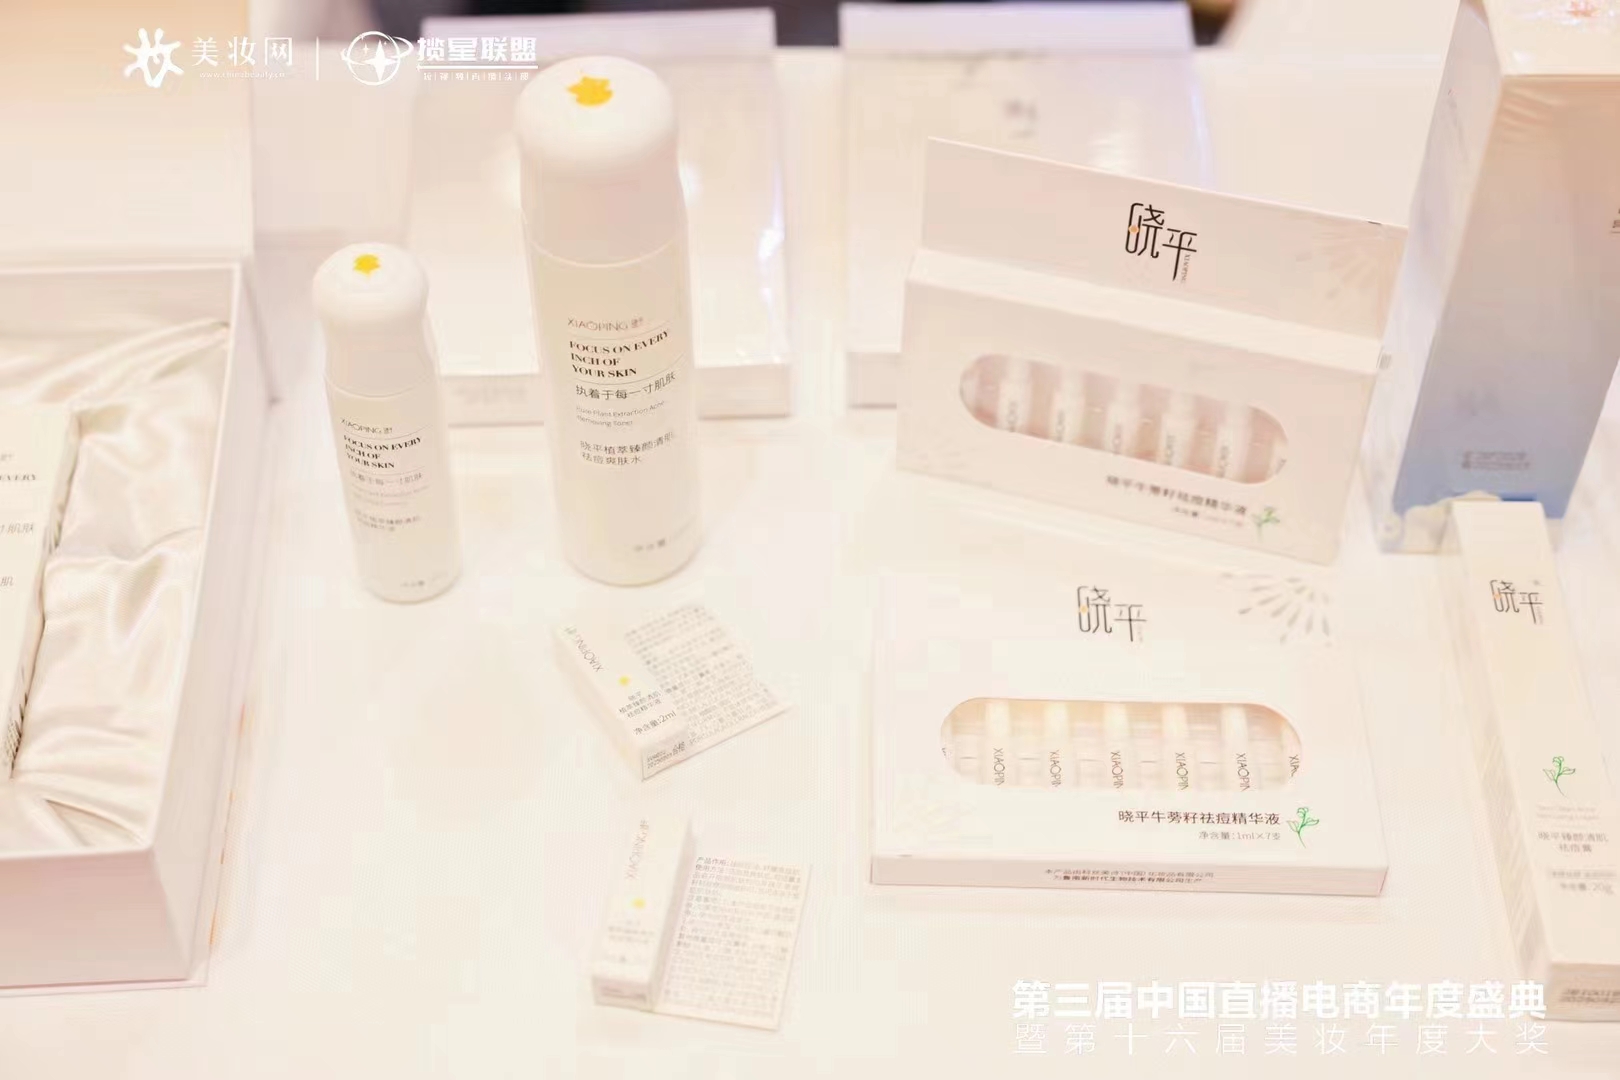 Xiaoping® won the Best Growth Brand of the Year at the 16th Annual Beauty Awards(图1)